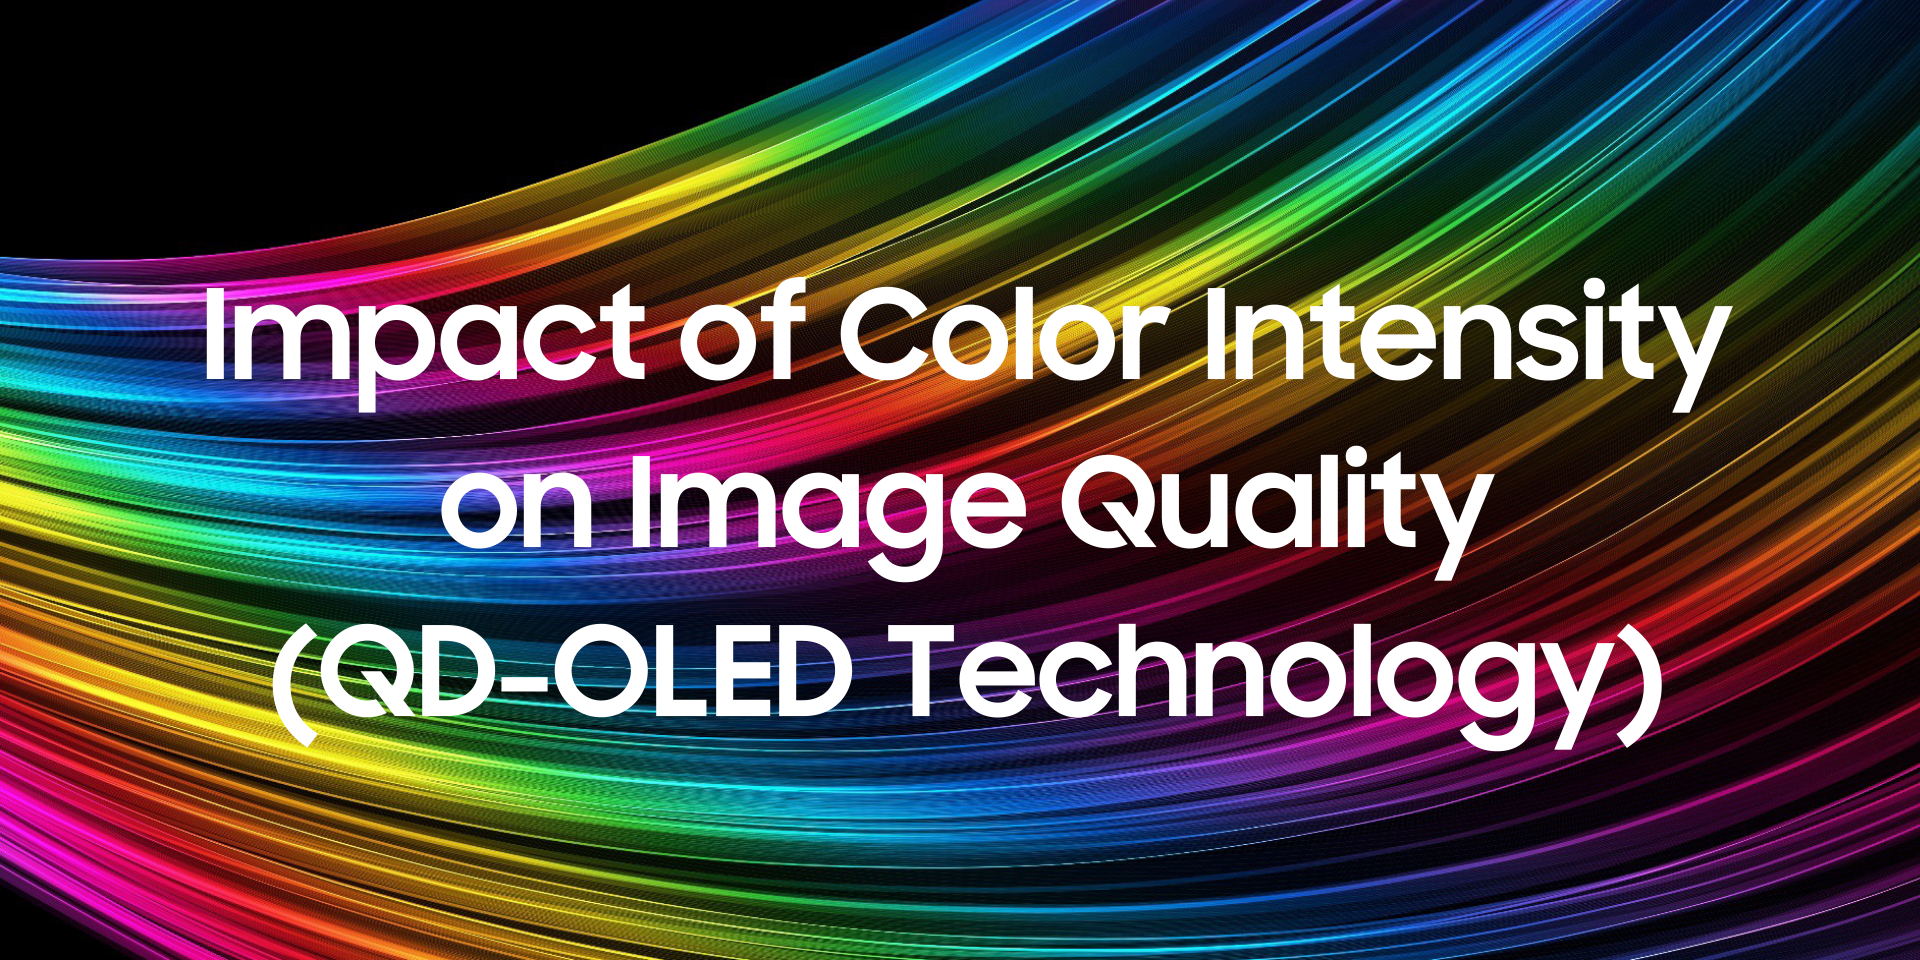 Impact of Color Intensity on Image Quality and QD-OLED